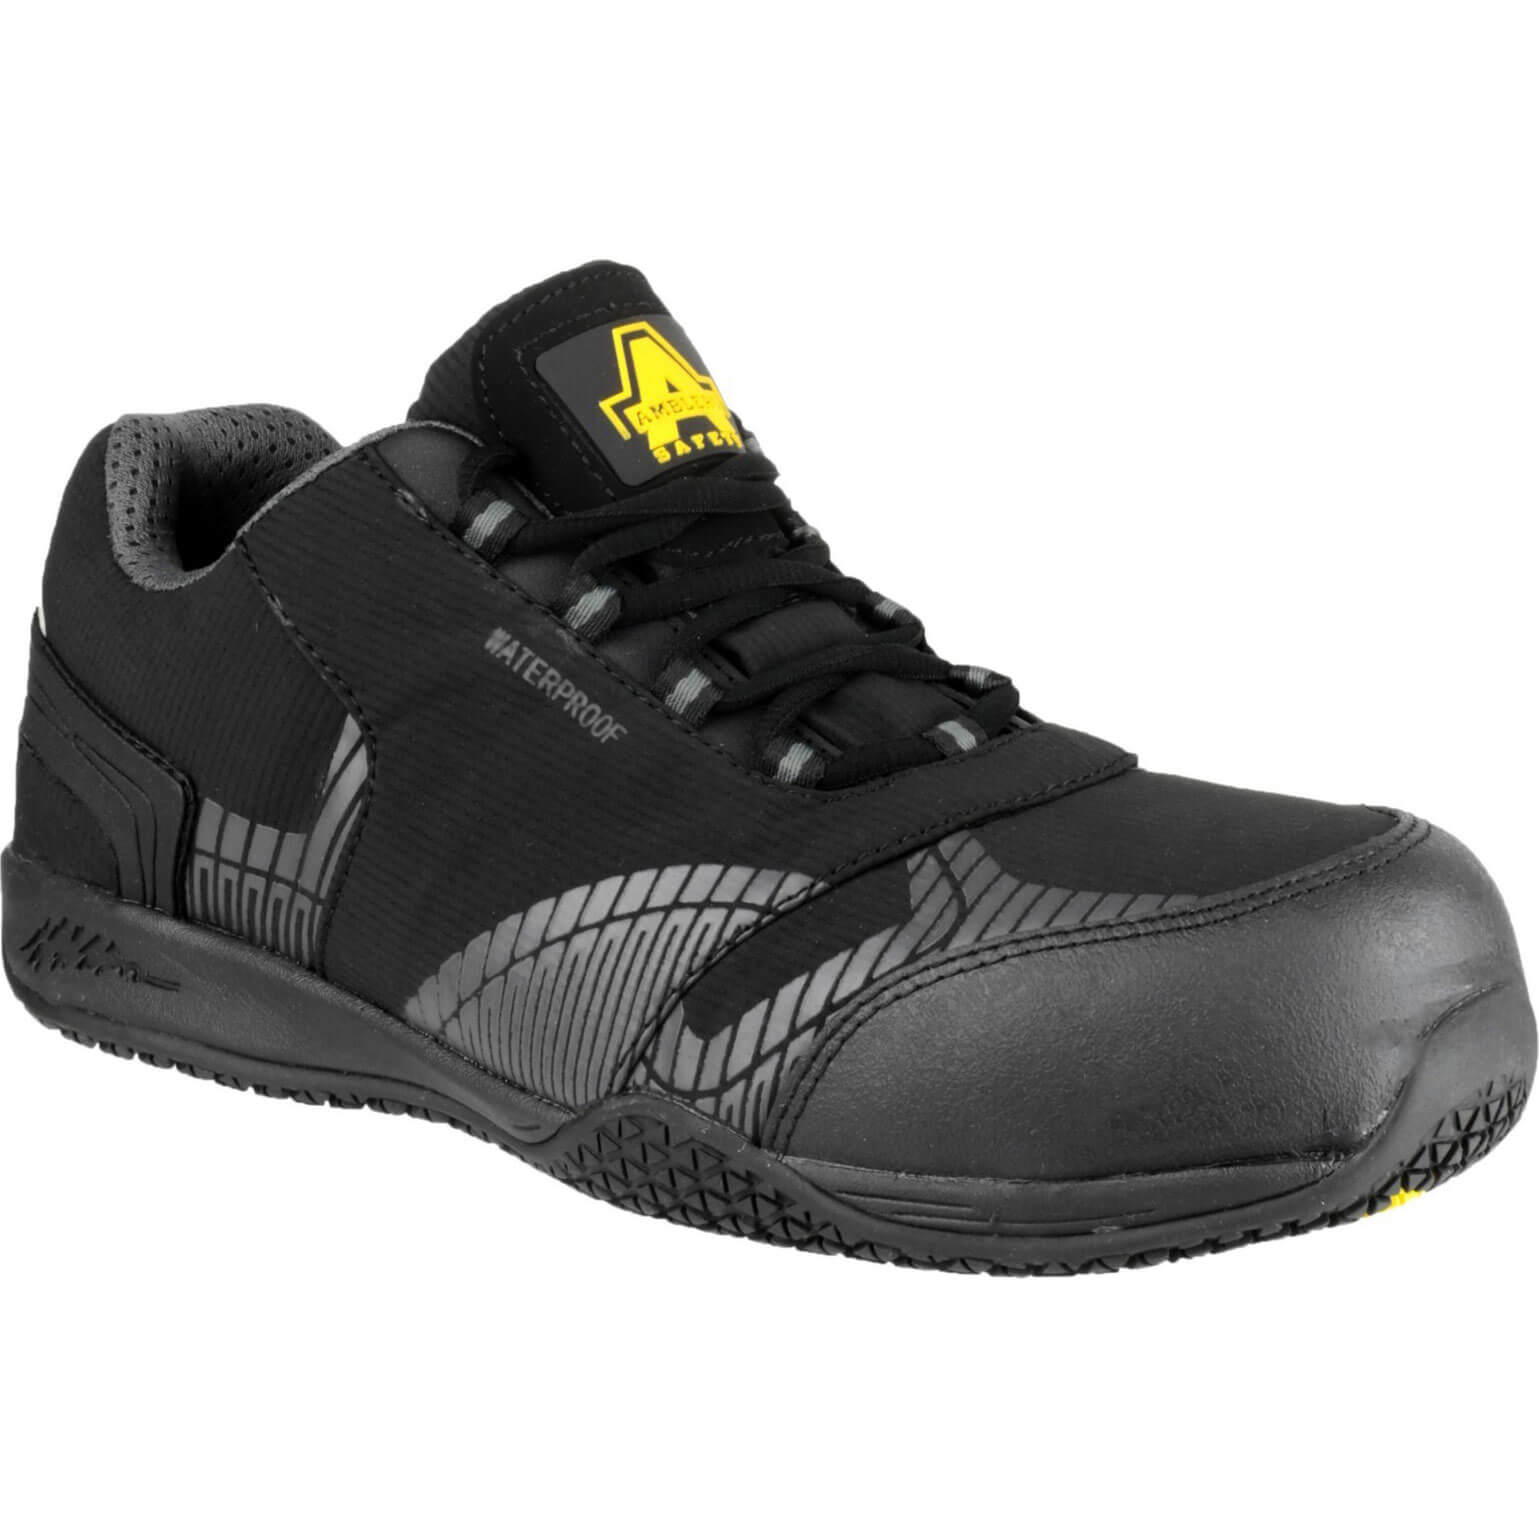 Image of Amblers Safety FS29C Waterproof Metal Free Non Leather Safety Trainer Black Size 6.5